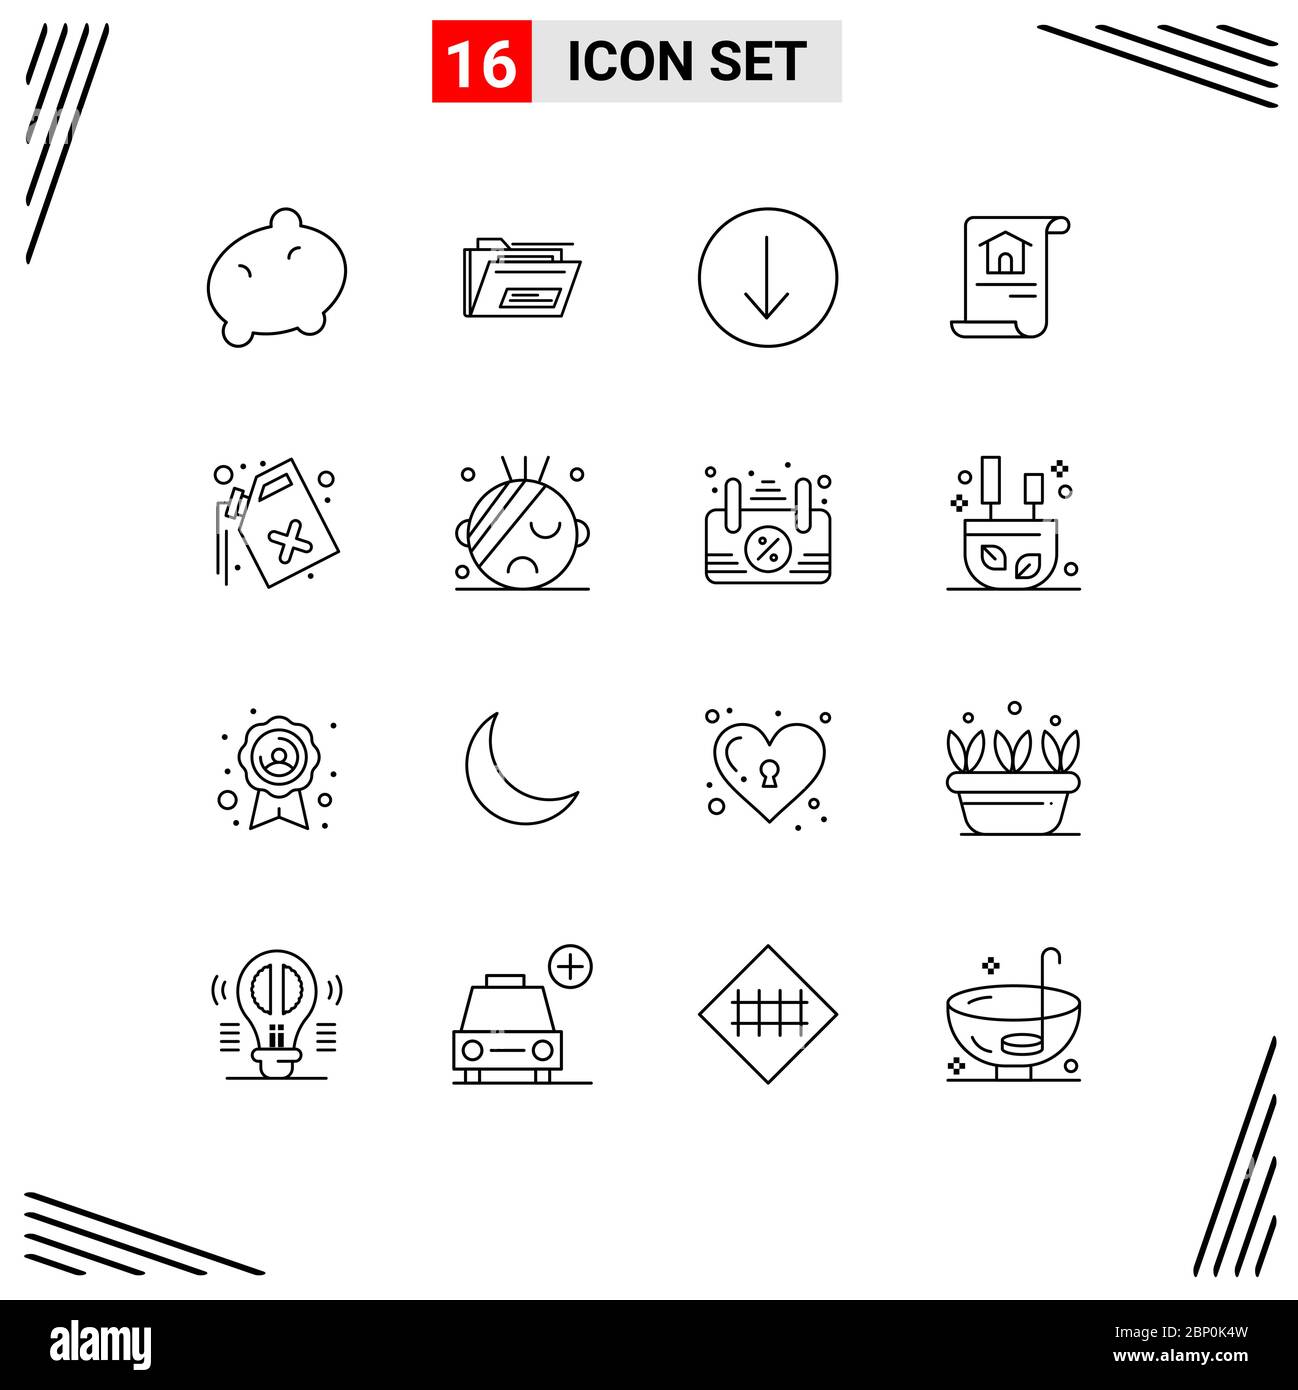 User Interface Pack of 16 Basic Outlines of waste, gas, symbol, can, home Editable Vector Design Elements Stock Vector